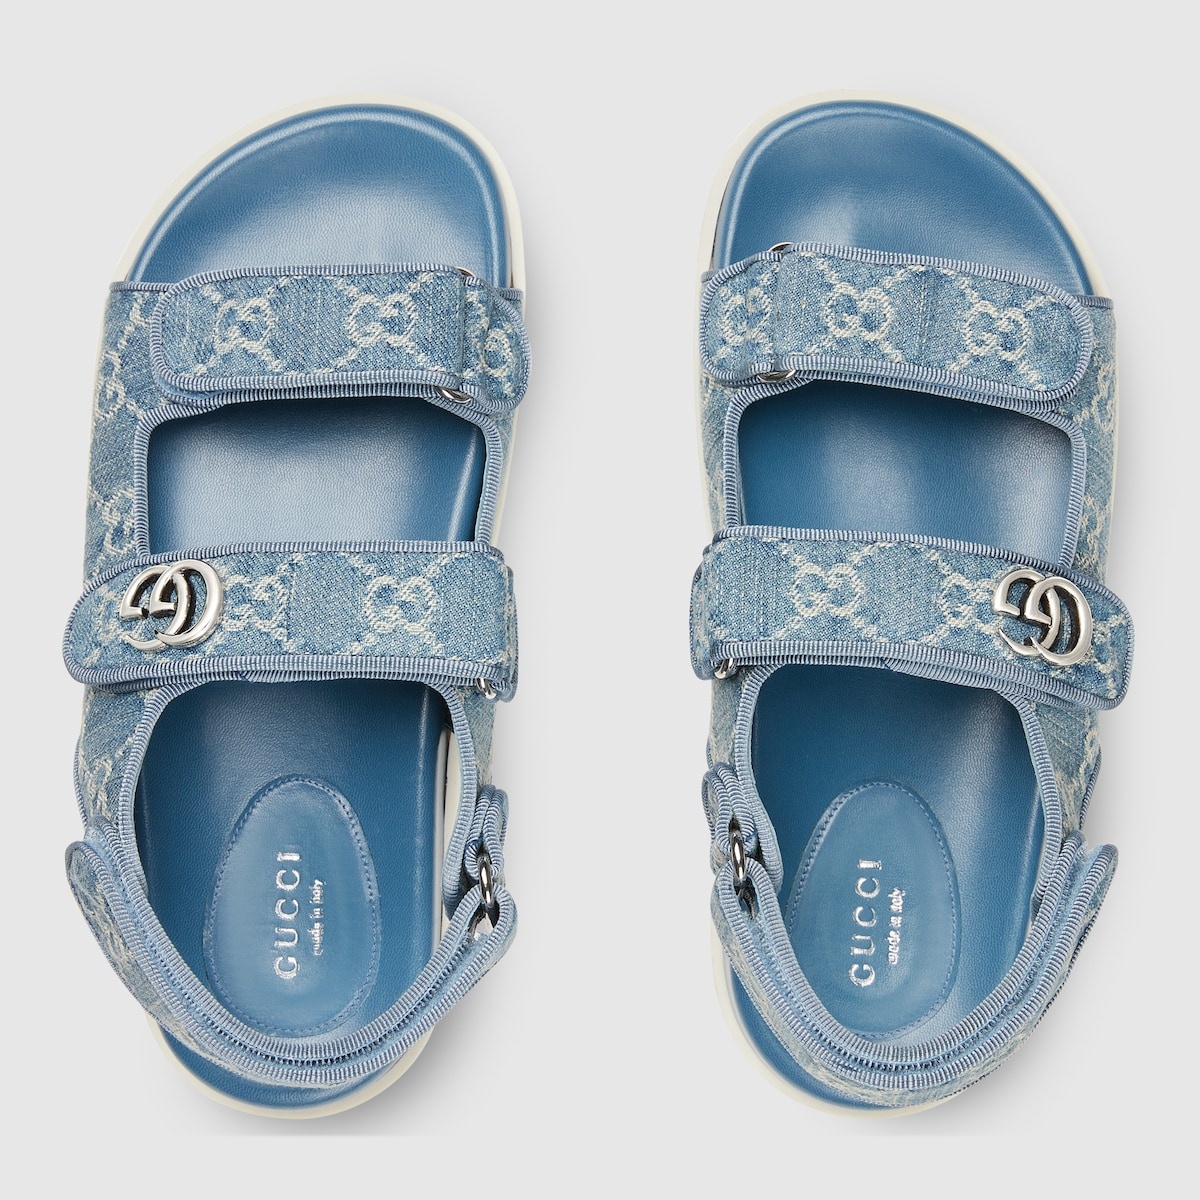 Women's sandal with Double G - 5